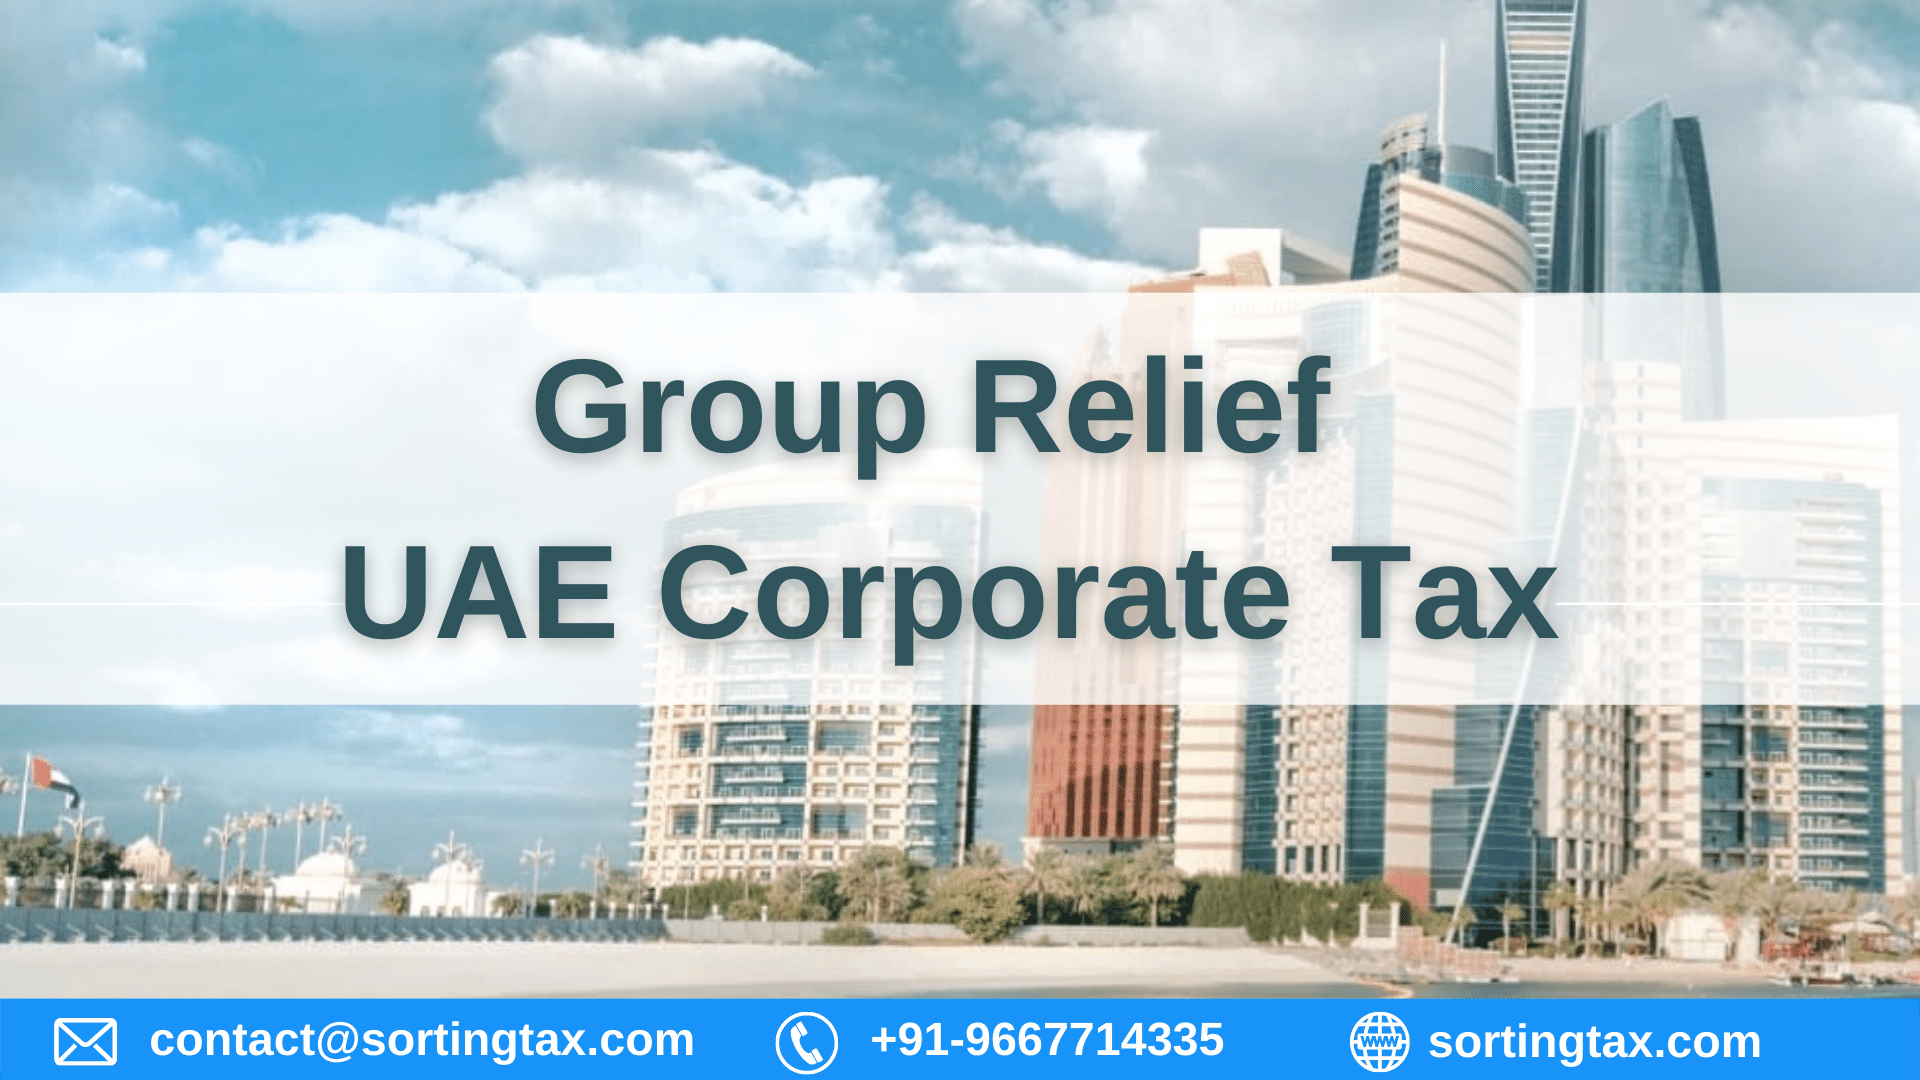 Group Relief under UAE Corporate Tax